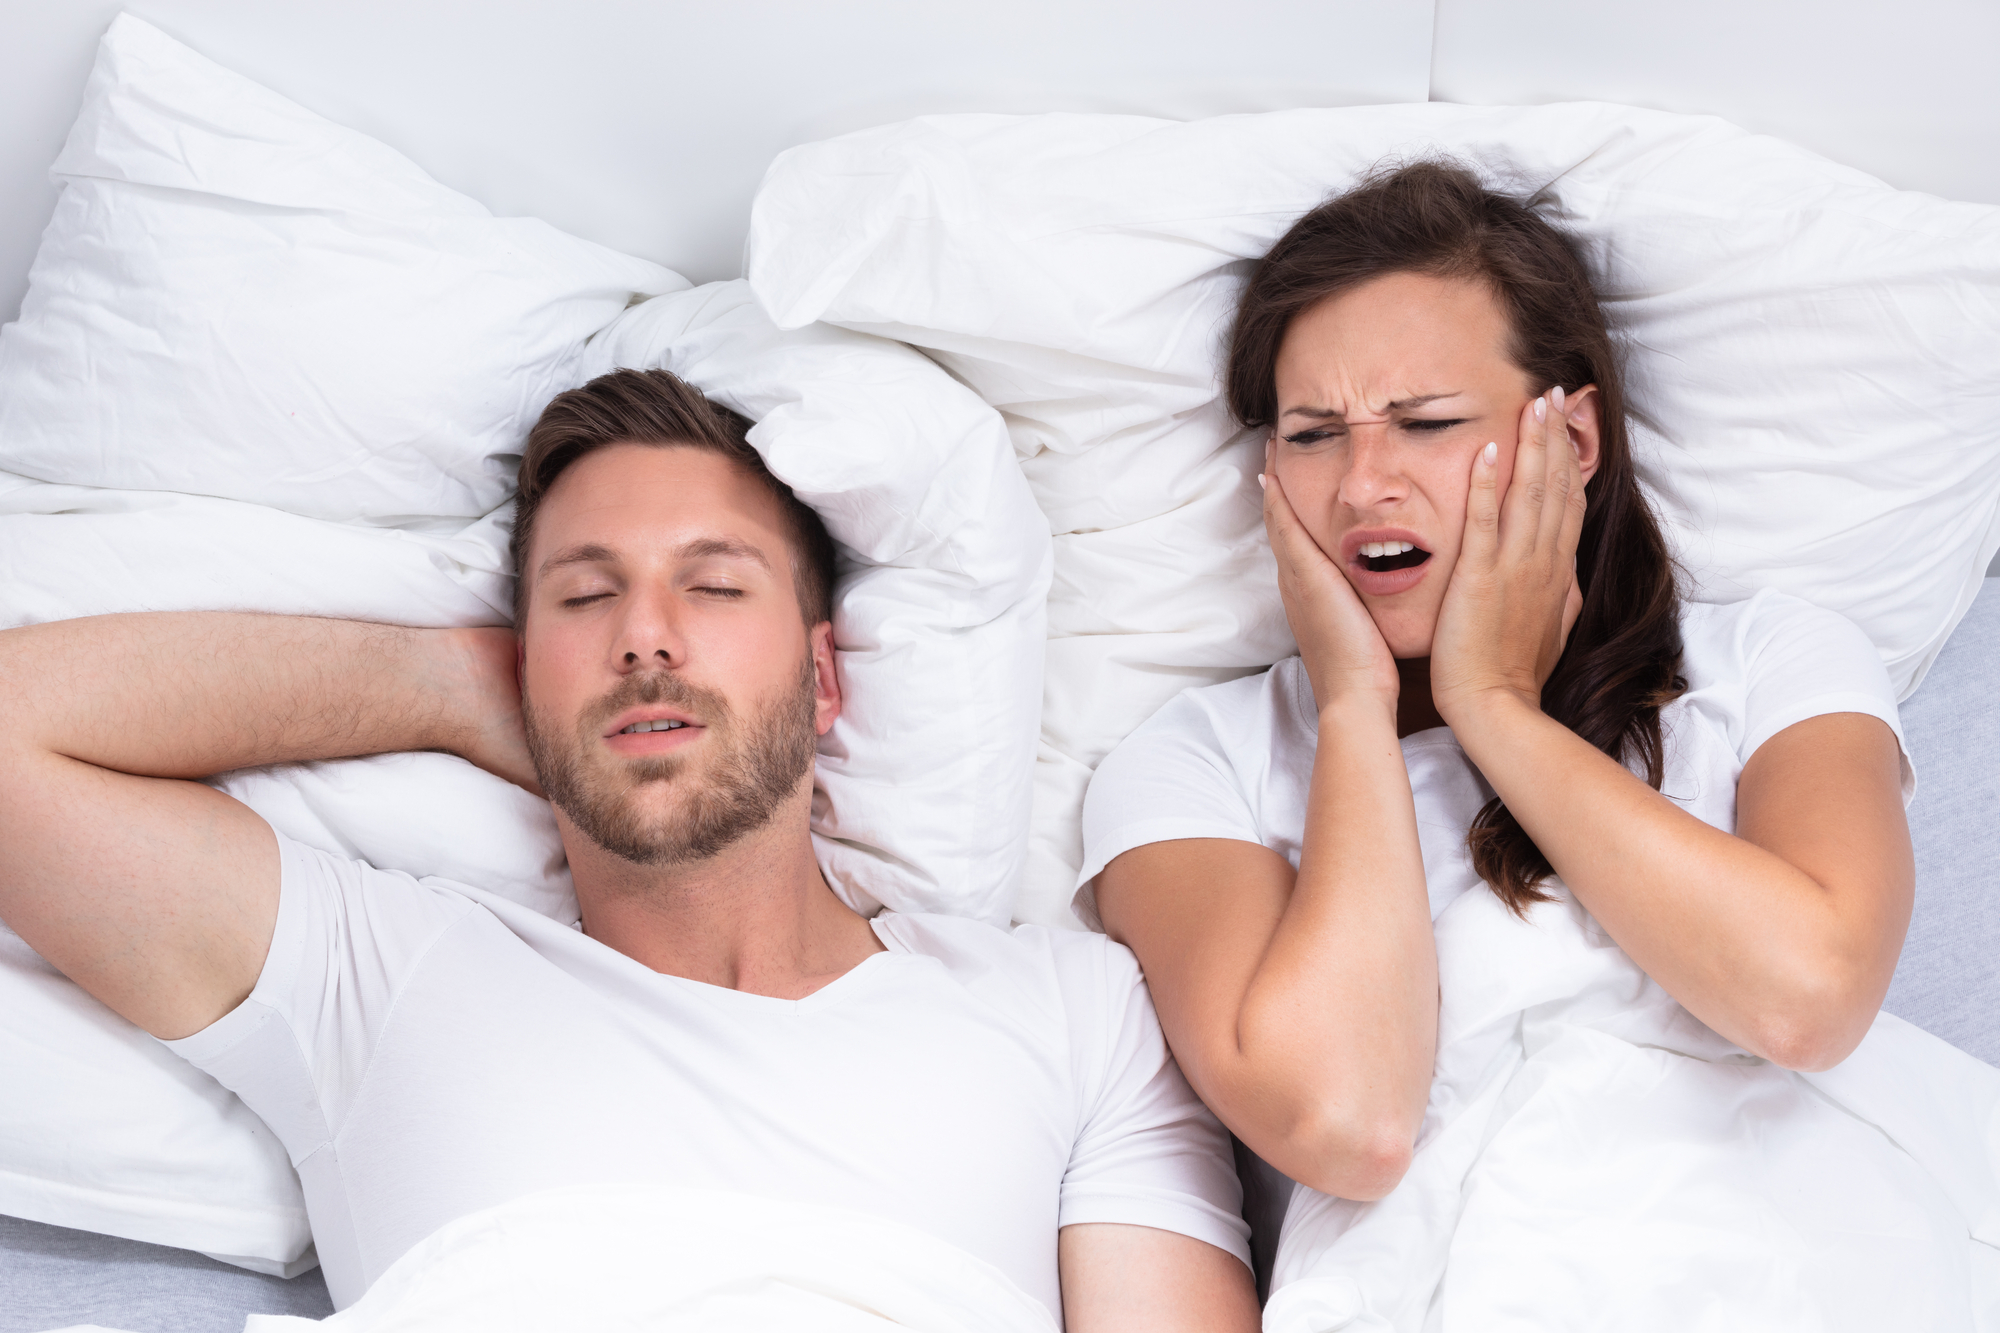 Woman Covering Her Ears While Man Snoring (a sign of sleep apnea)